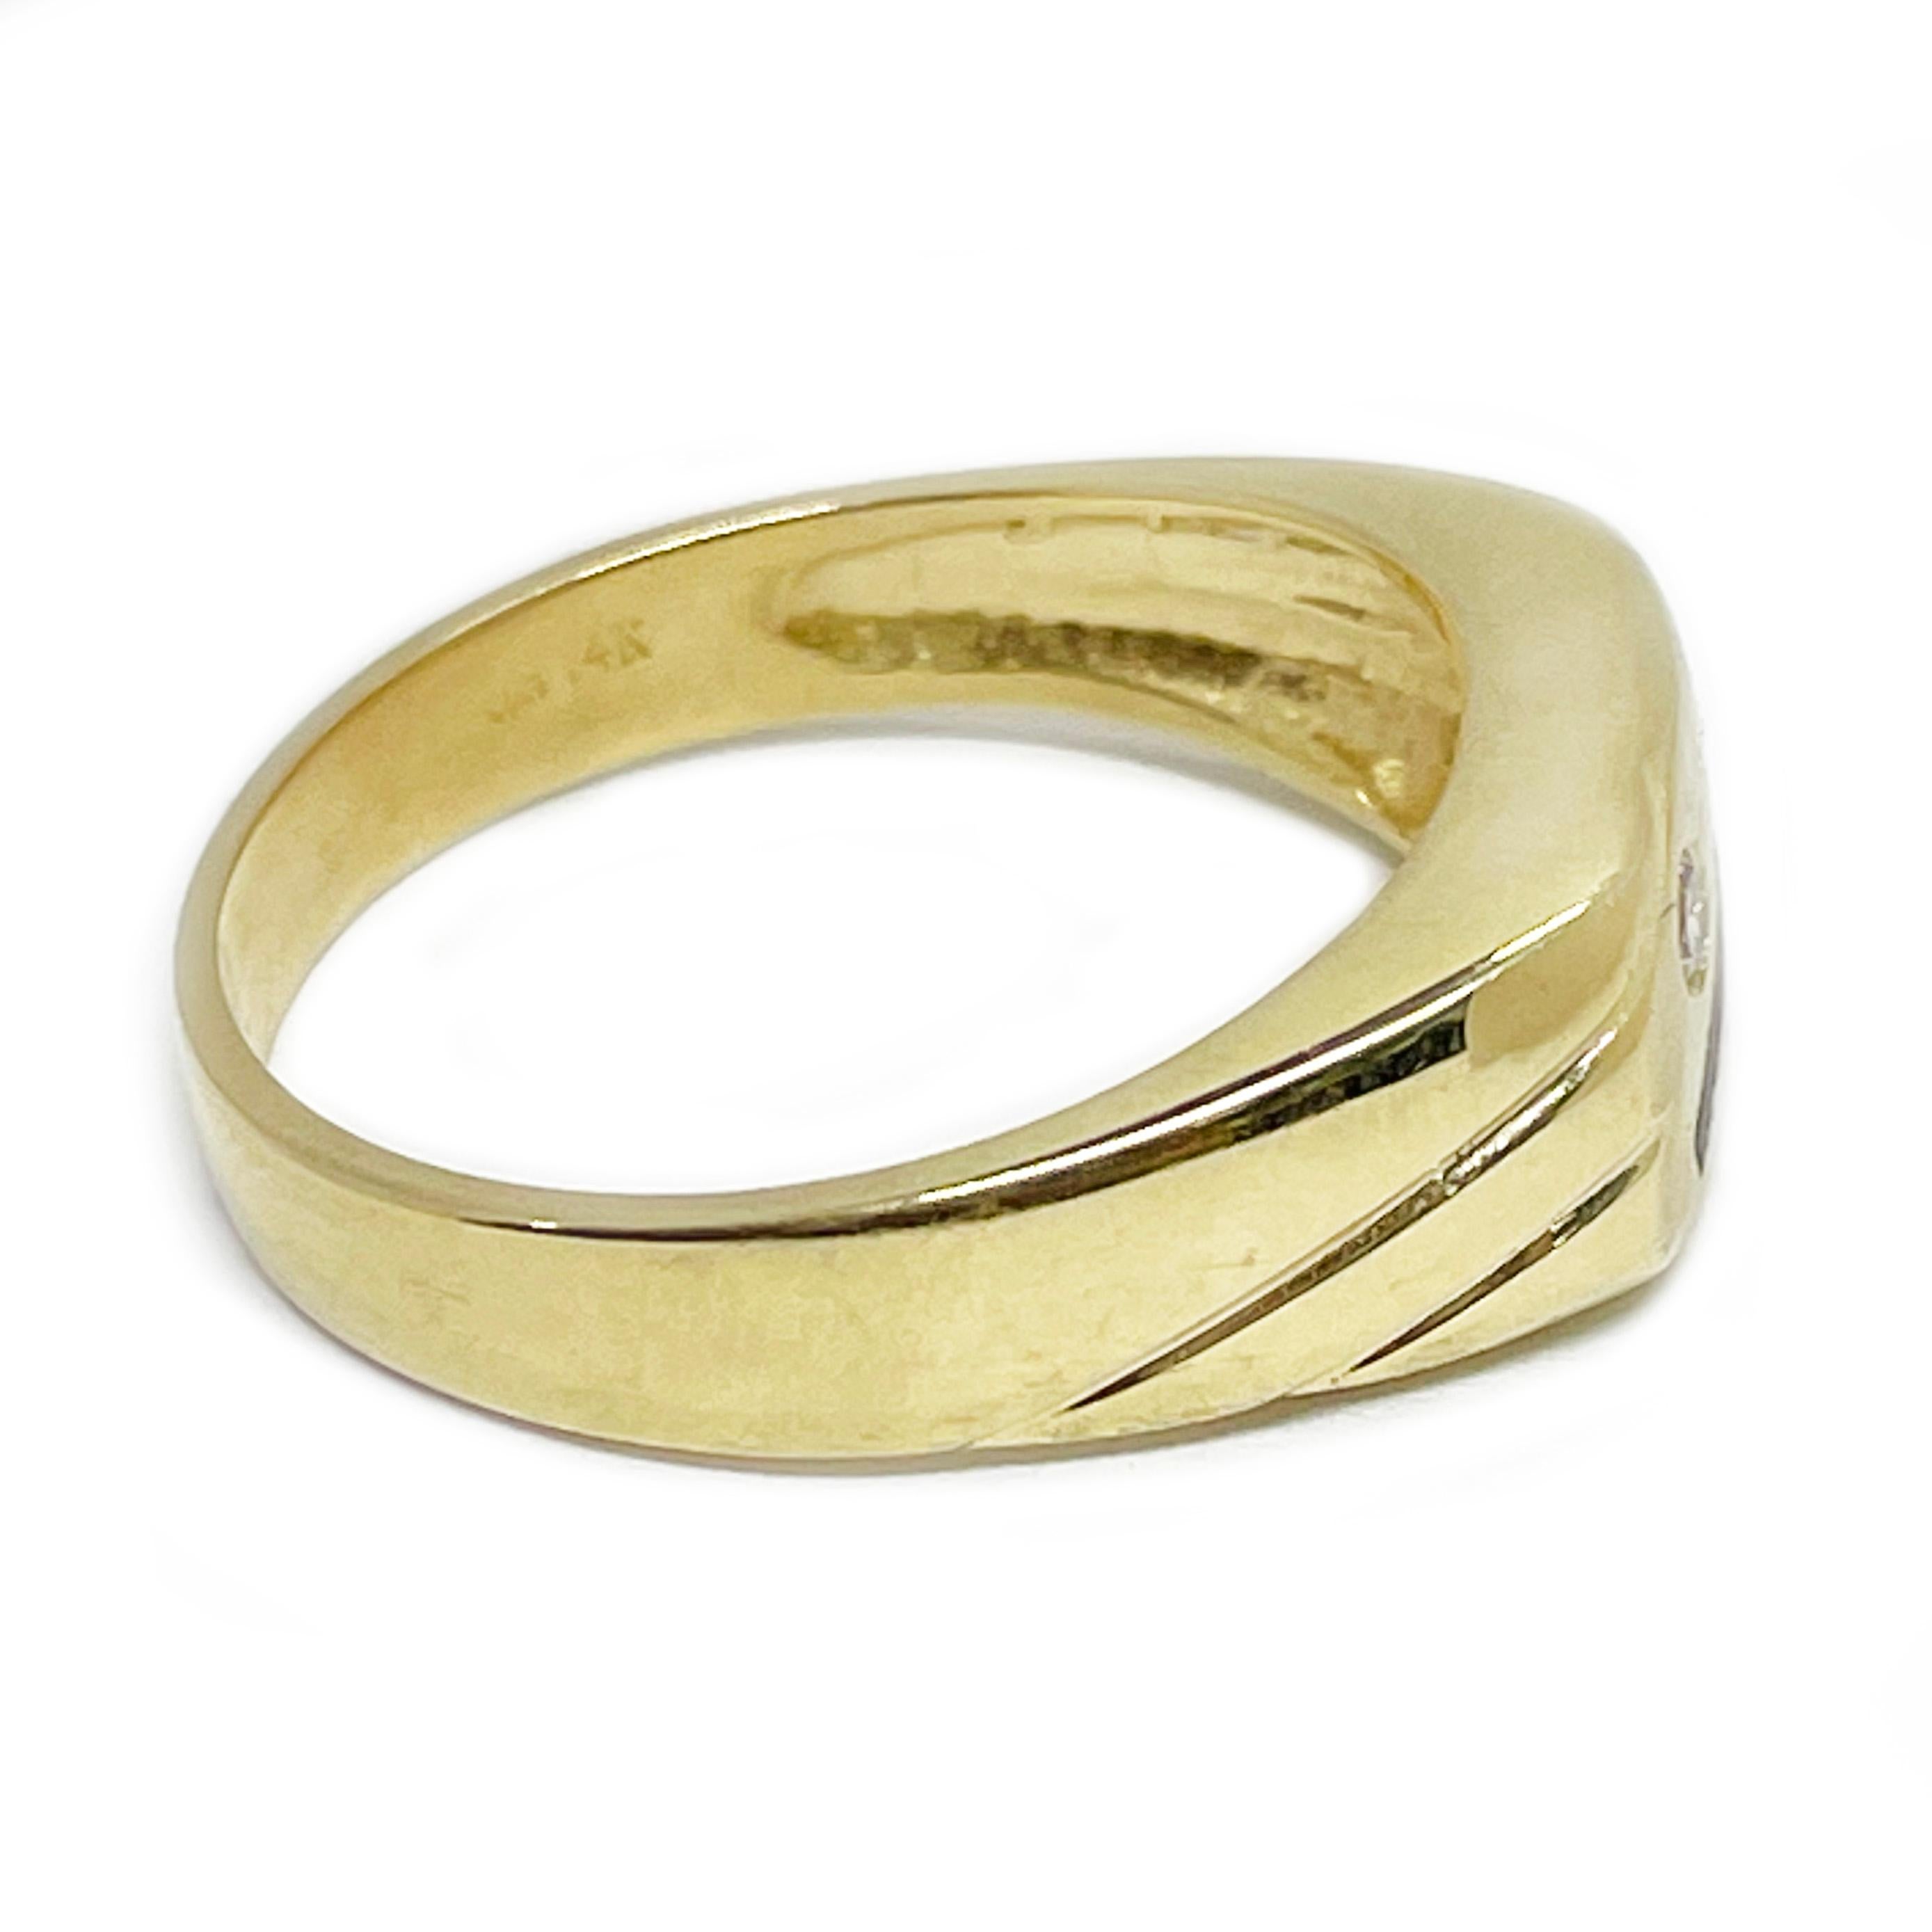 14 Karat Yellow Gold Signet Diamond Ring. The ring features two diagonal stripes painted black on the top with a single round diamond flush set on a satin finish. The rest of the ring has a smooth shiny finish. The diamond measures 2.2mm. On the